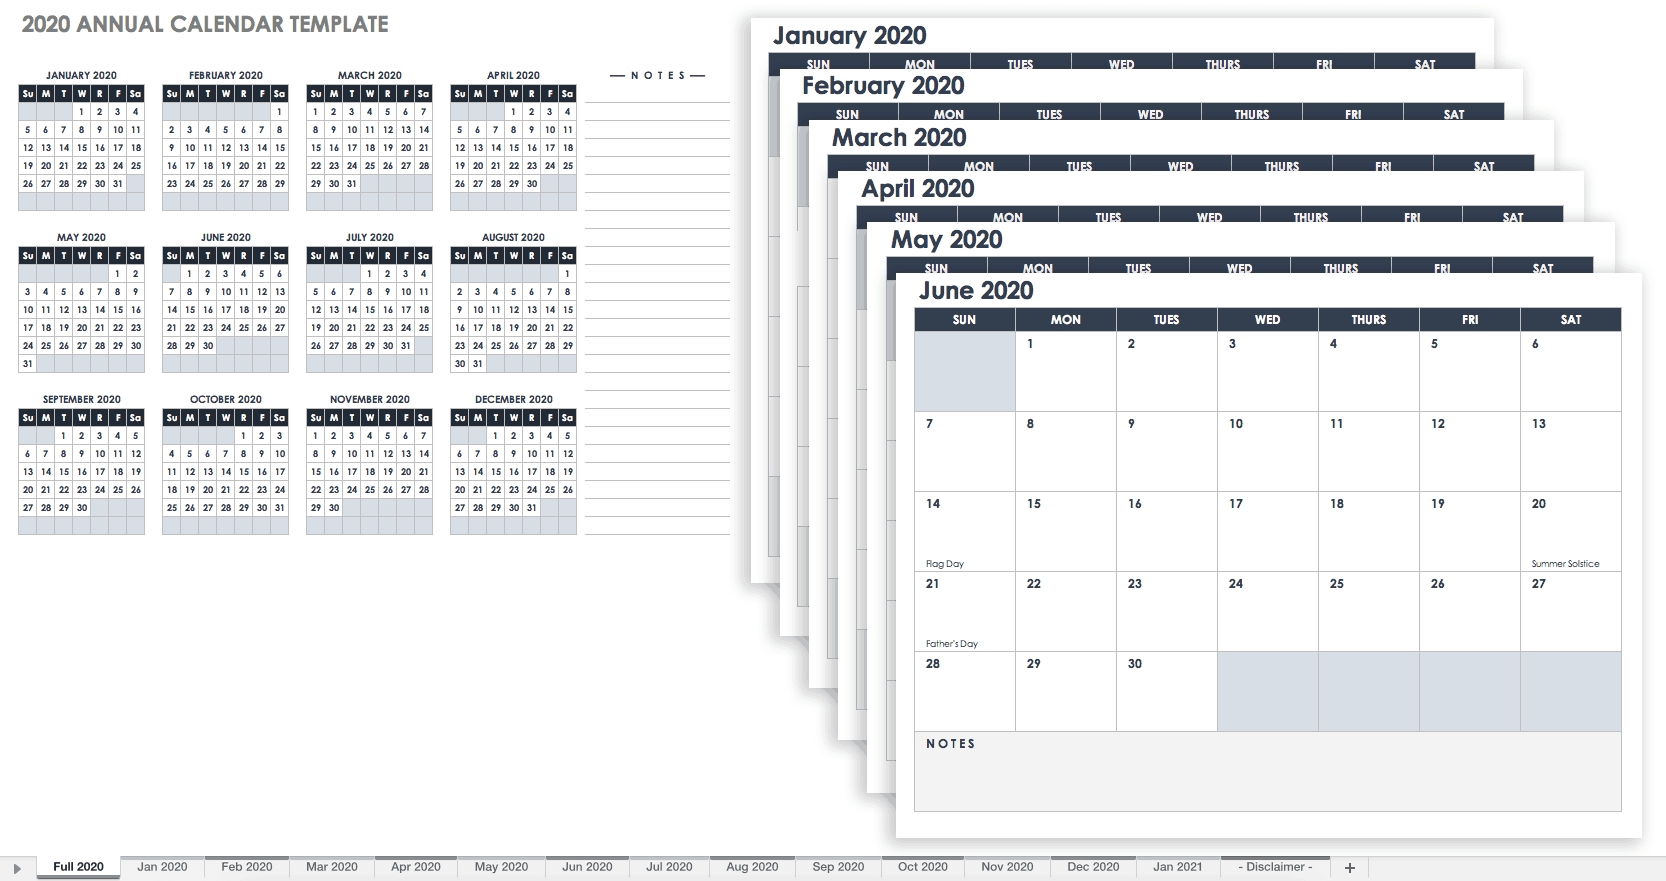 Free Blank Calendar Templates - Smartsheet-Calendar Template 3 Months Per Page Time And Date